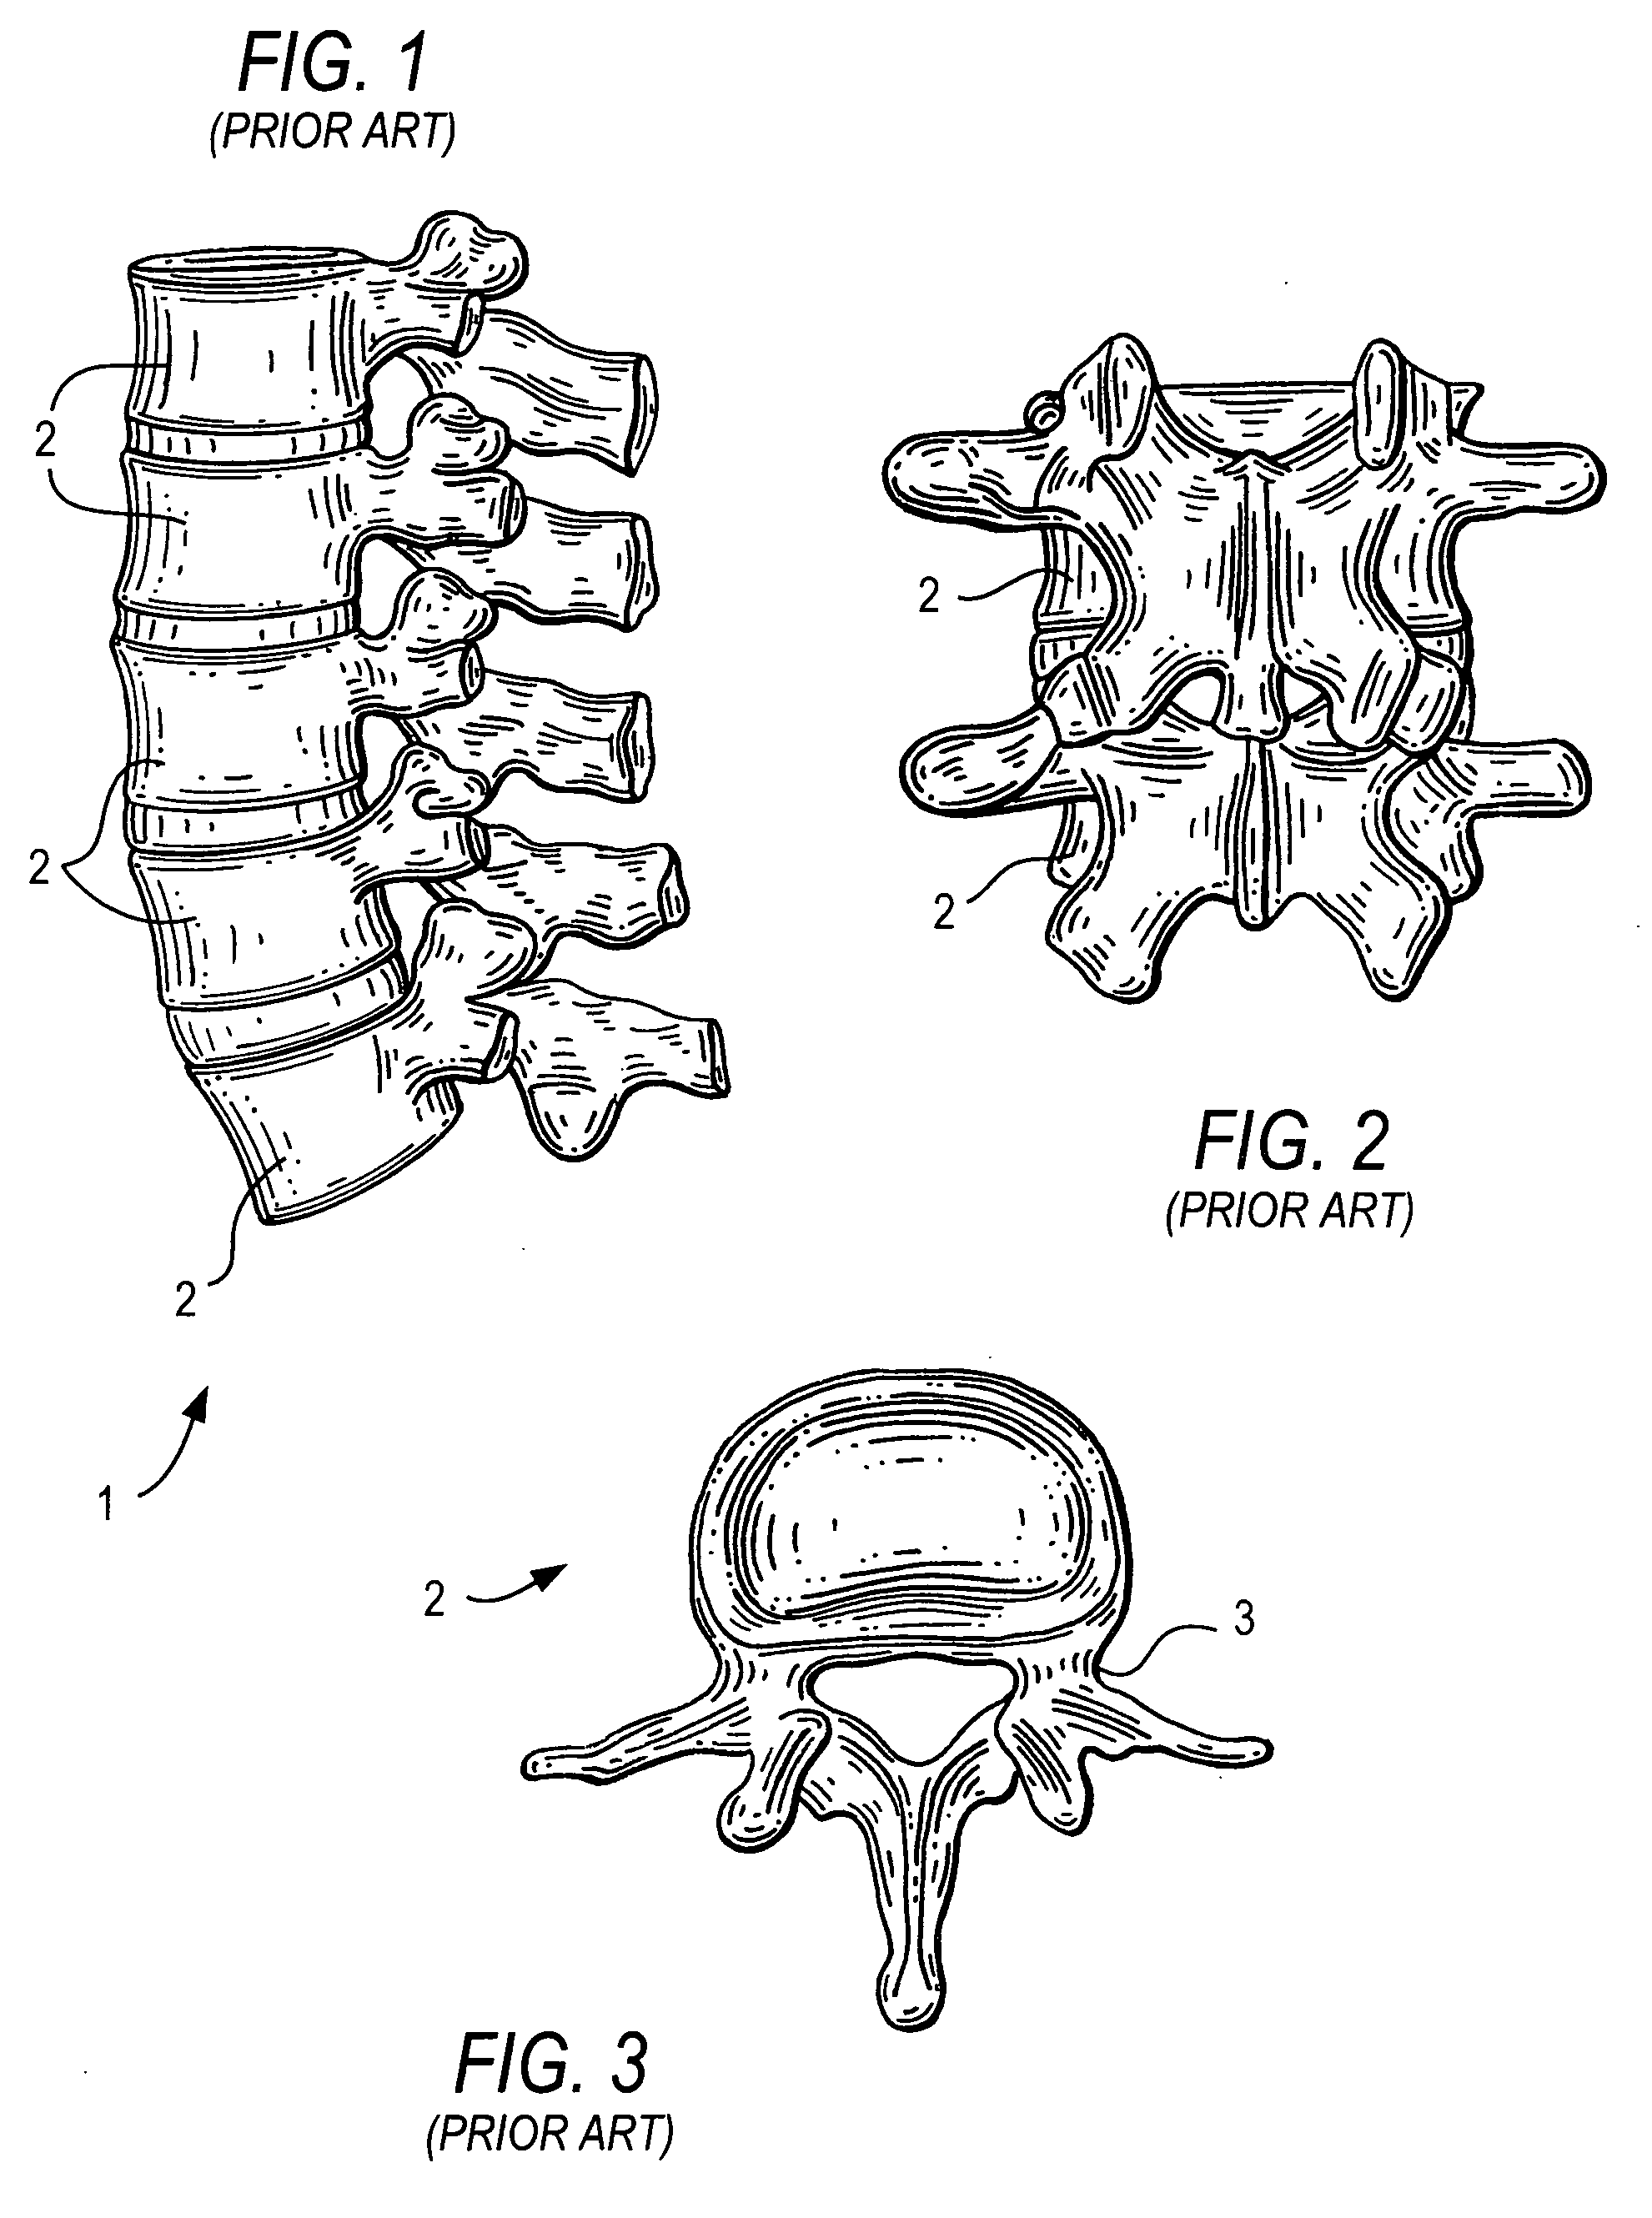 Guide pin for pedicle screw placement and method for use of such guide pin in spinal fusion surgeries